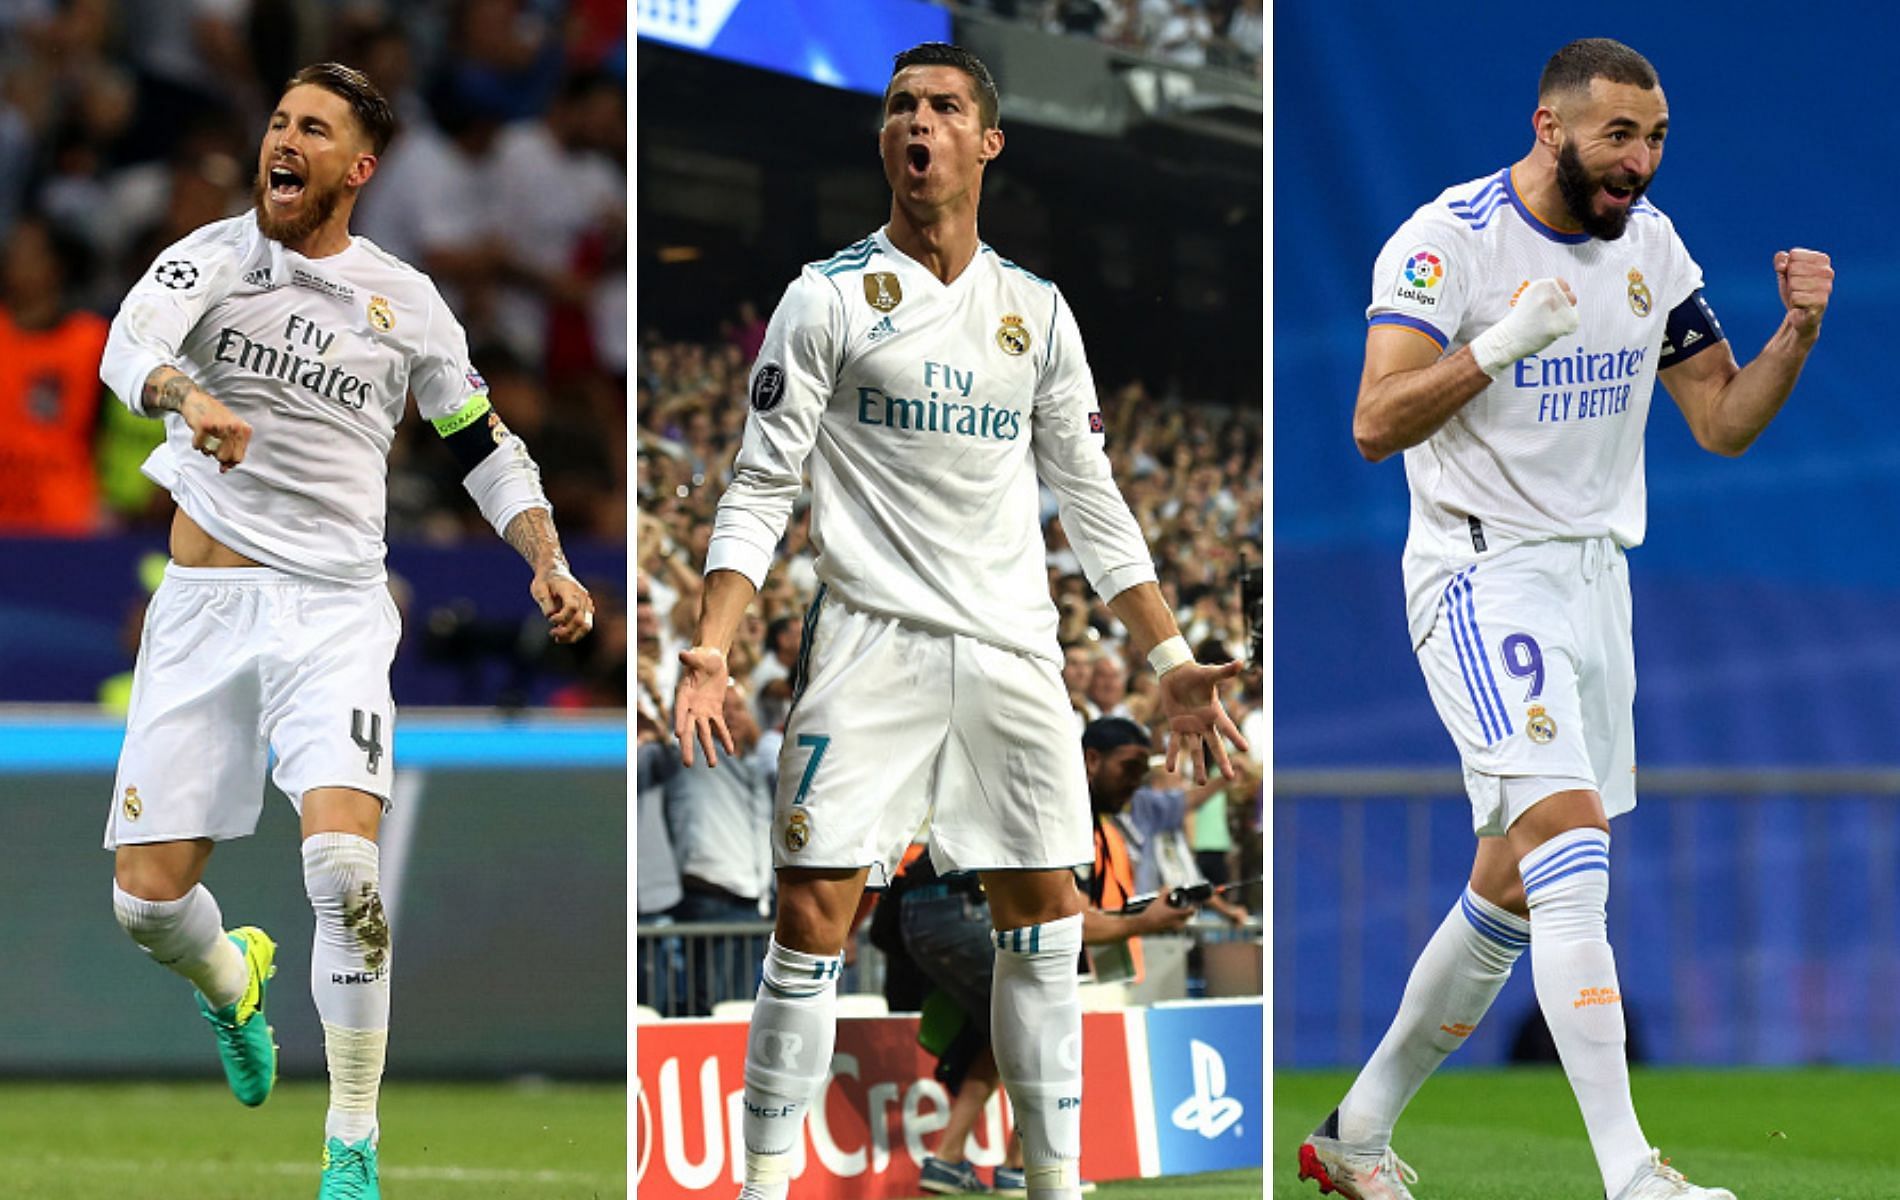 Evolution of Madrid's legendary number 7 through the years